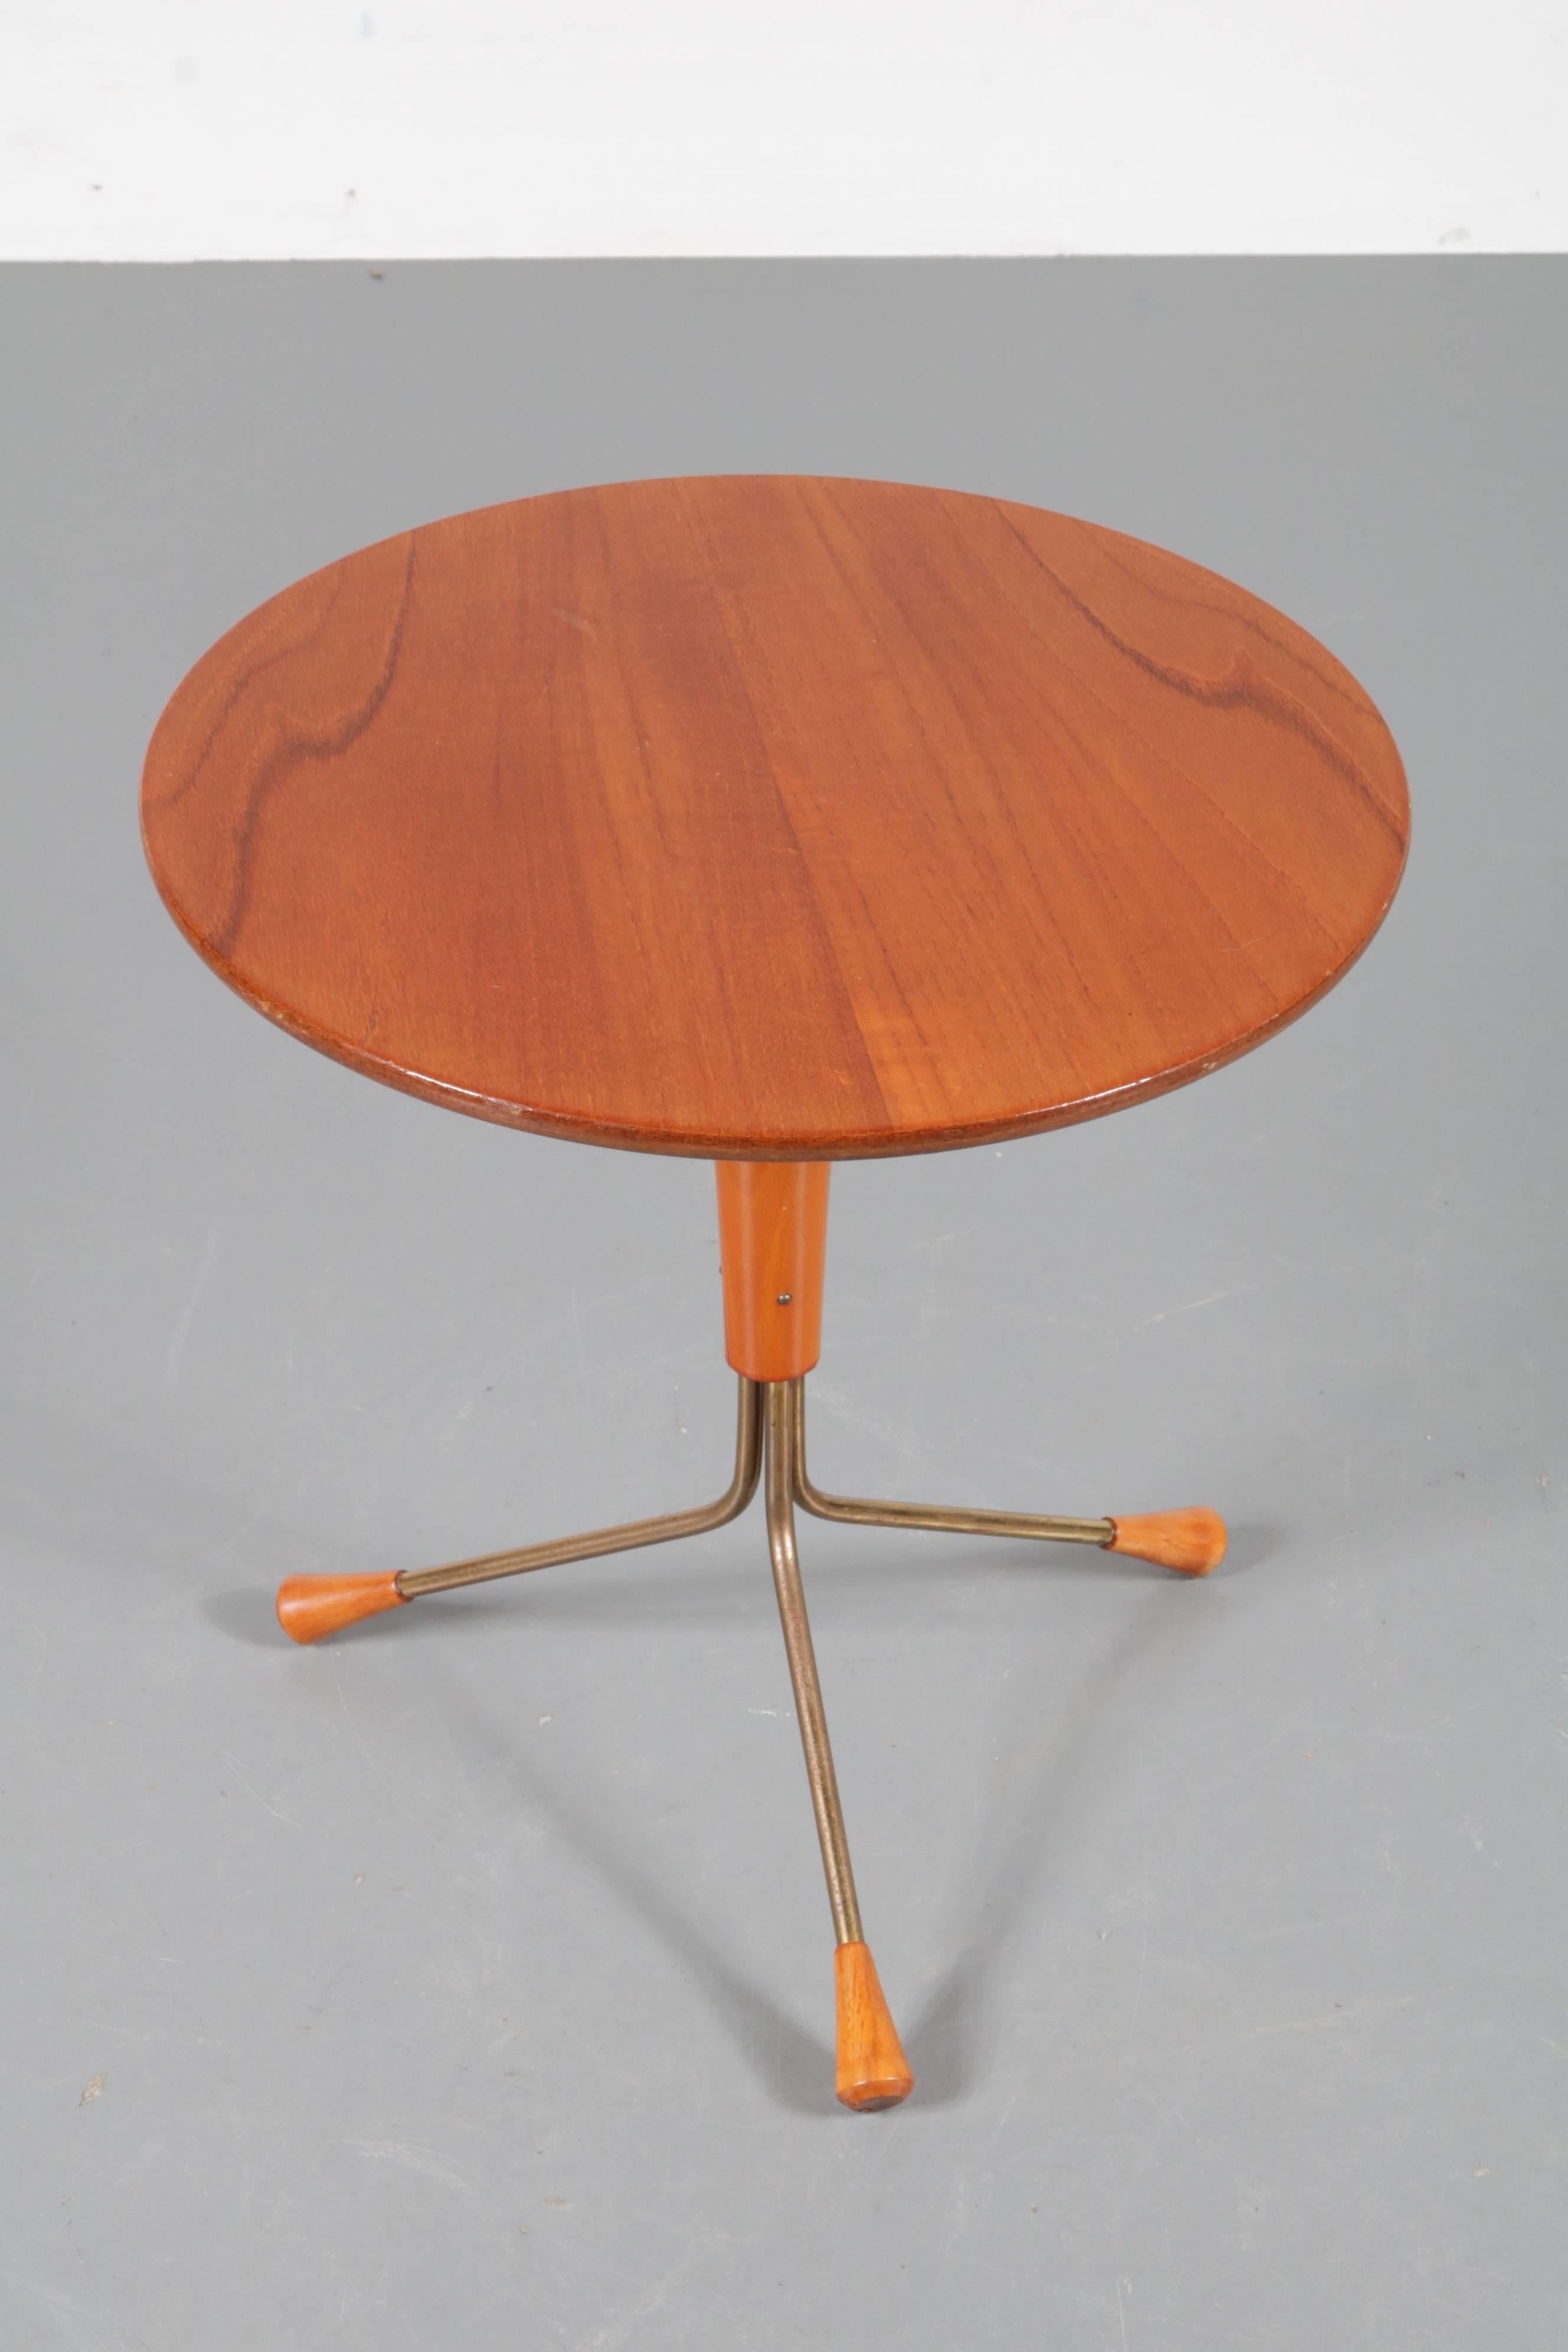 An elegant side table designed by Albert Larsson, manufactured by Tibro in Sweden in the 1950s.

This lovely piece is made of high quality warm brown teak wood with wonderful brass legs in a beautiful bent shape. The leg ends are made of the same